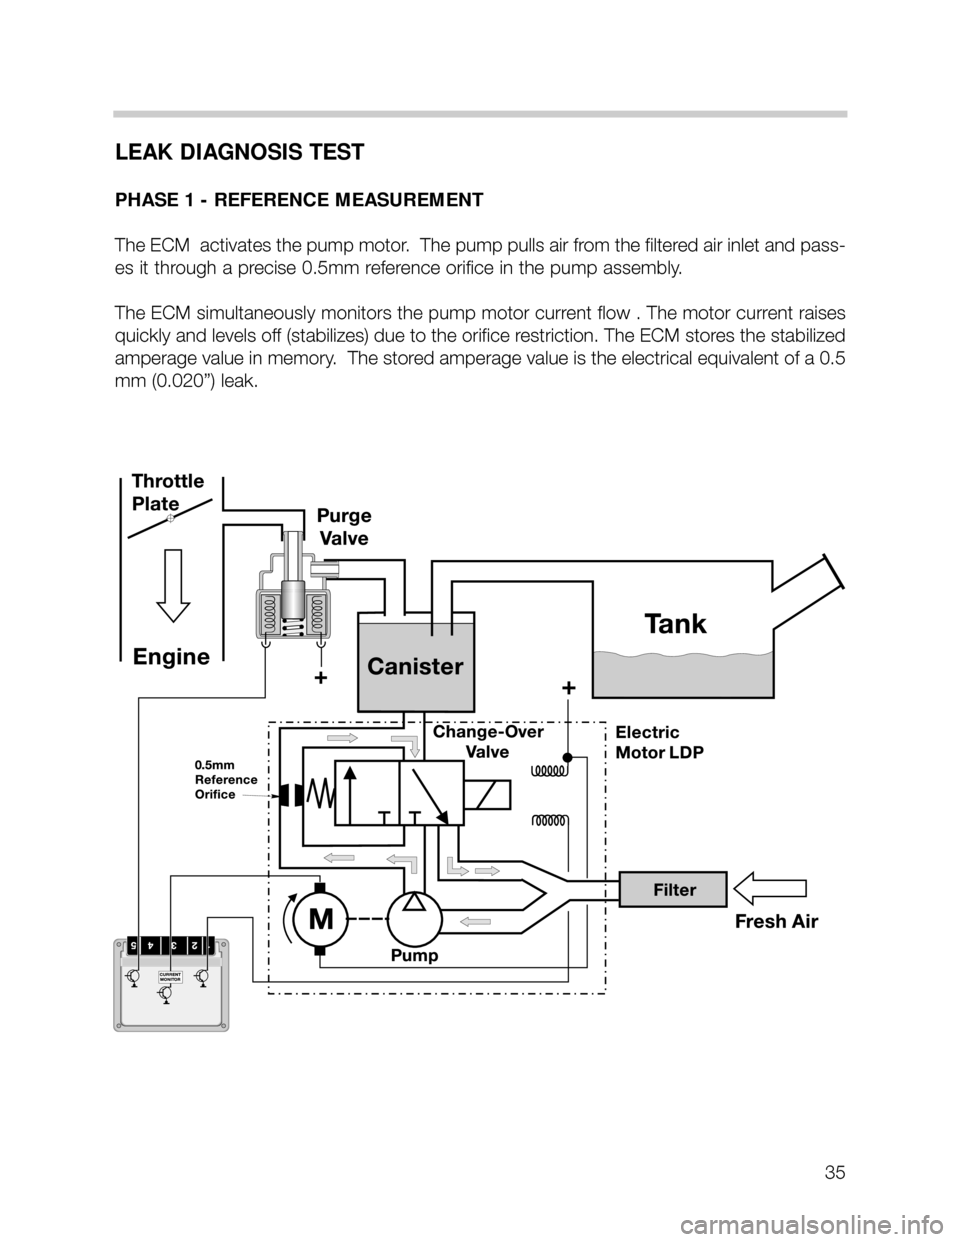 BMW X5 2001 E53 M62TU Engine Workshop Manual LEAK DIAGNOSIS TEST
PHASE 1 - REFERENCE MEASUREMENT
The ECM  activates the pump motor.  The pump pulls air from the filtered air inlet and pass-
es it through a precise 0.5mm reference orifice in the 